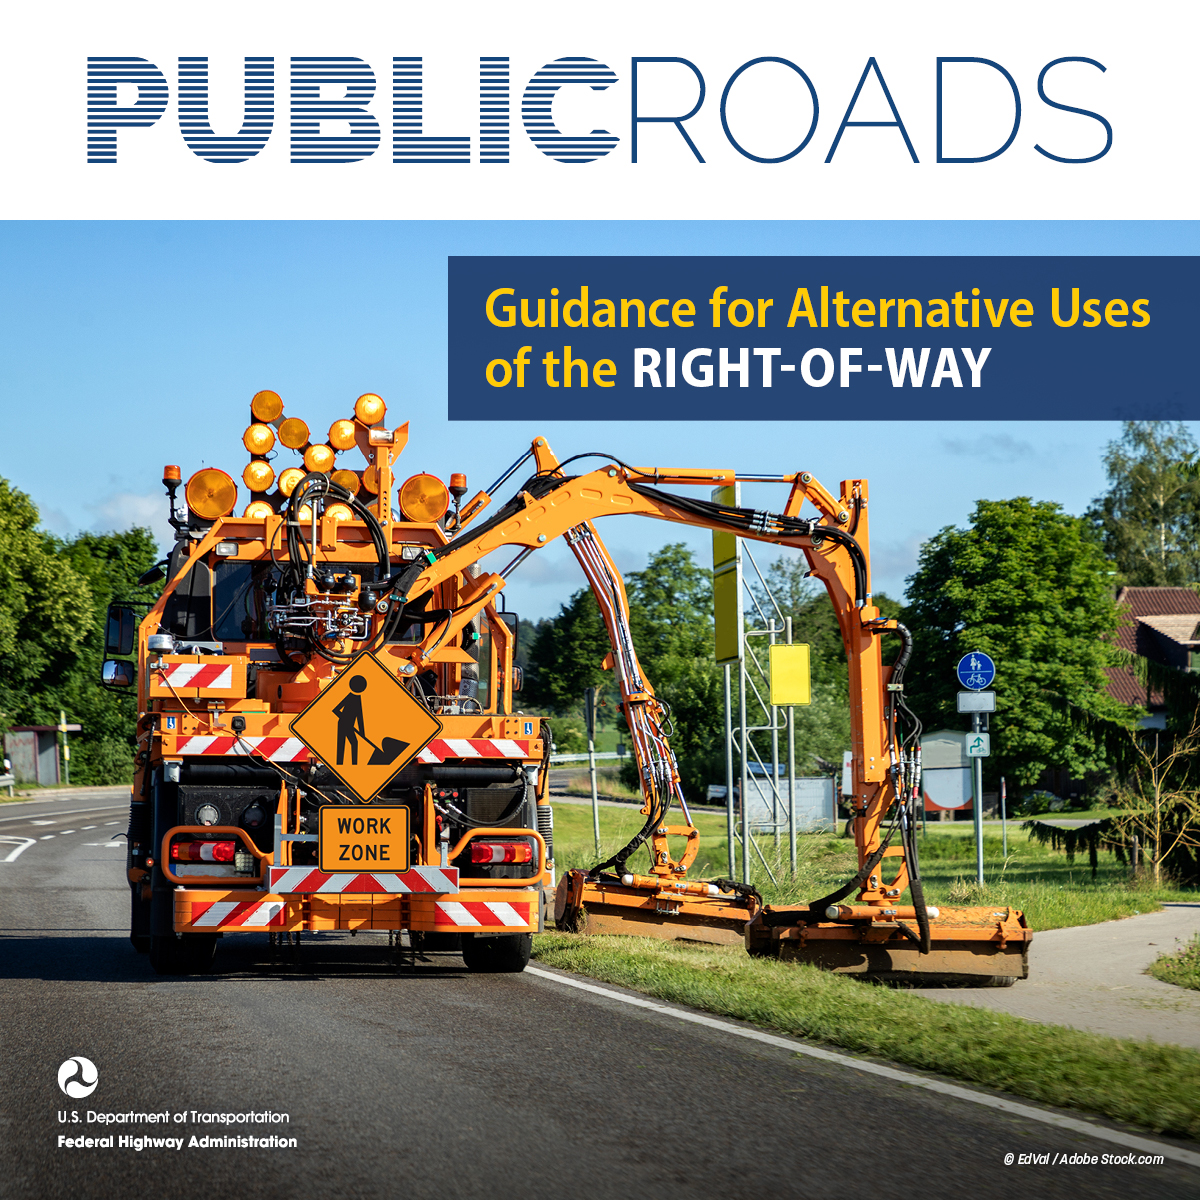 FHWA’s guidance on the use of rights-of-way ensures the consistent application of regulations across the country and describes where flexibilities exist within the current regulatory framework to support alternative uses. #PublicRoads bit.ly/3Sq9o1j